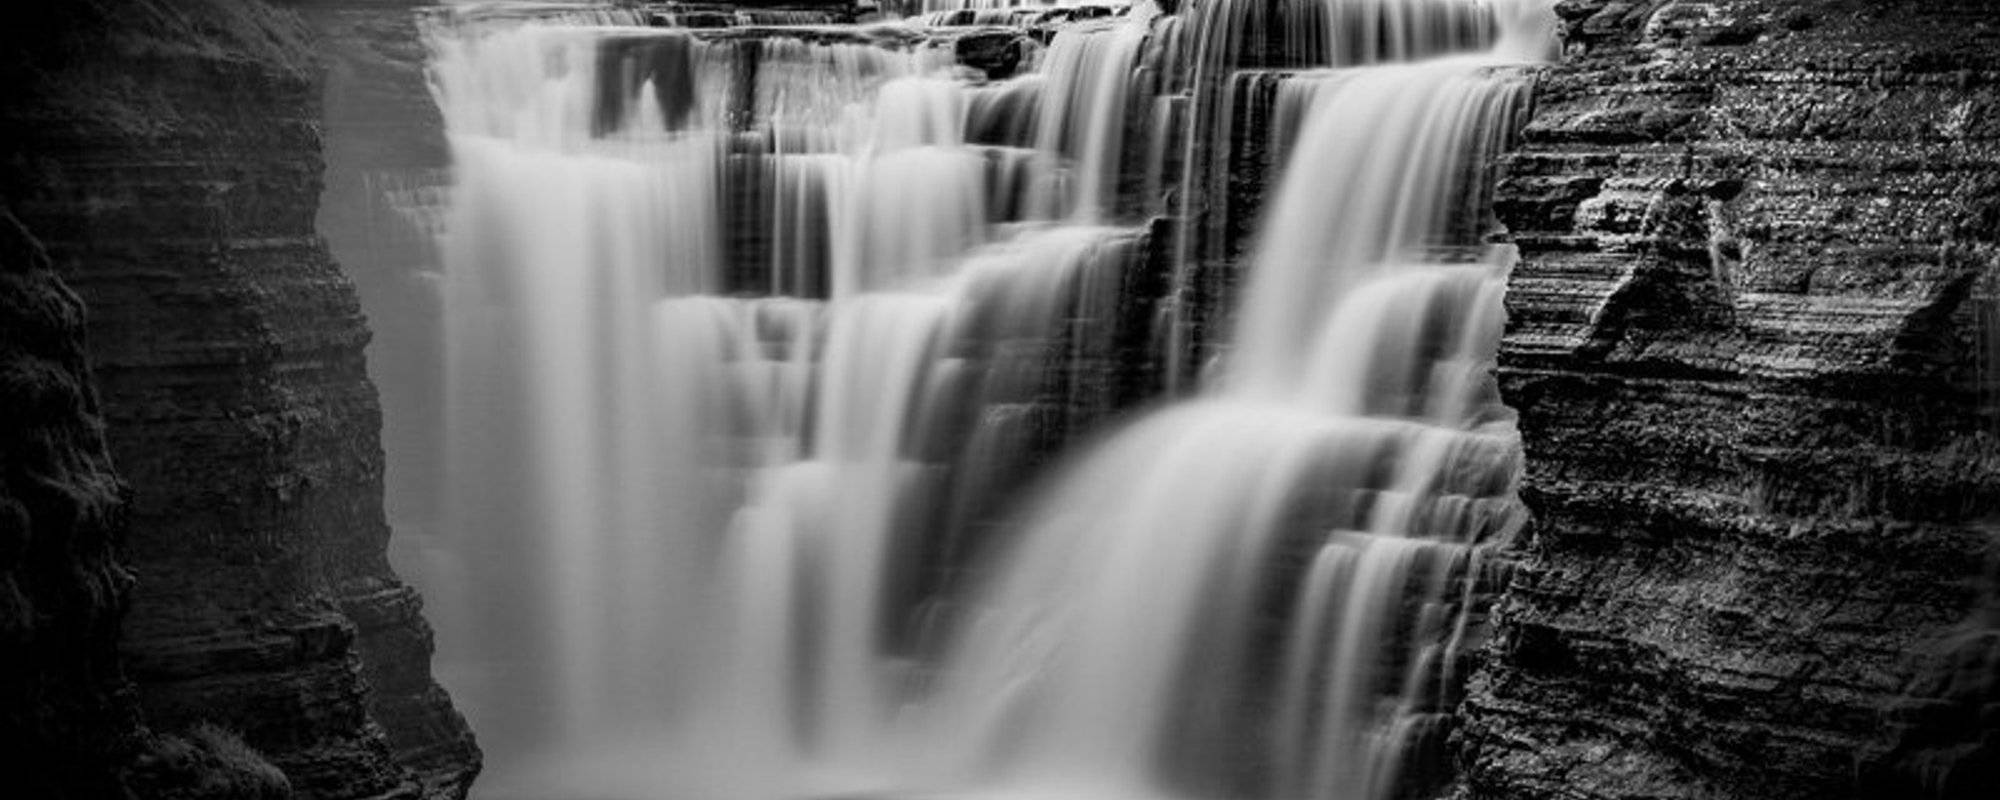 Long exposure waterfall images - Rochester NY & Letchworth State Park.